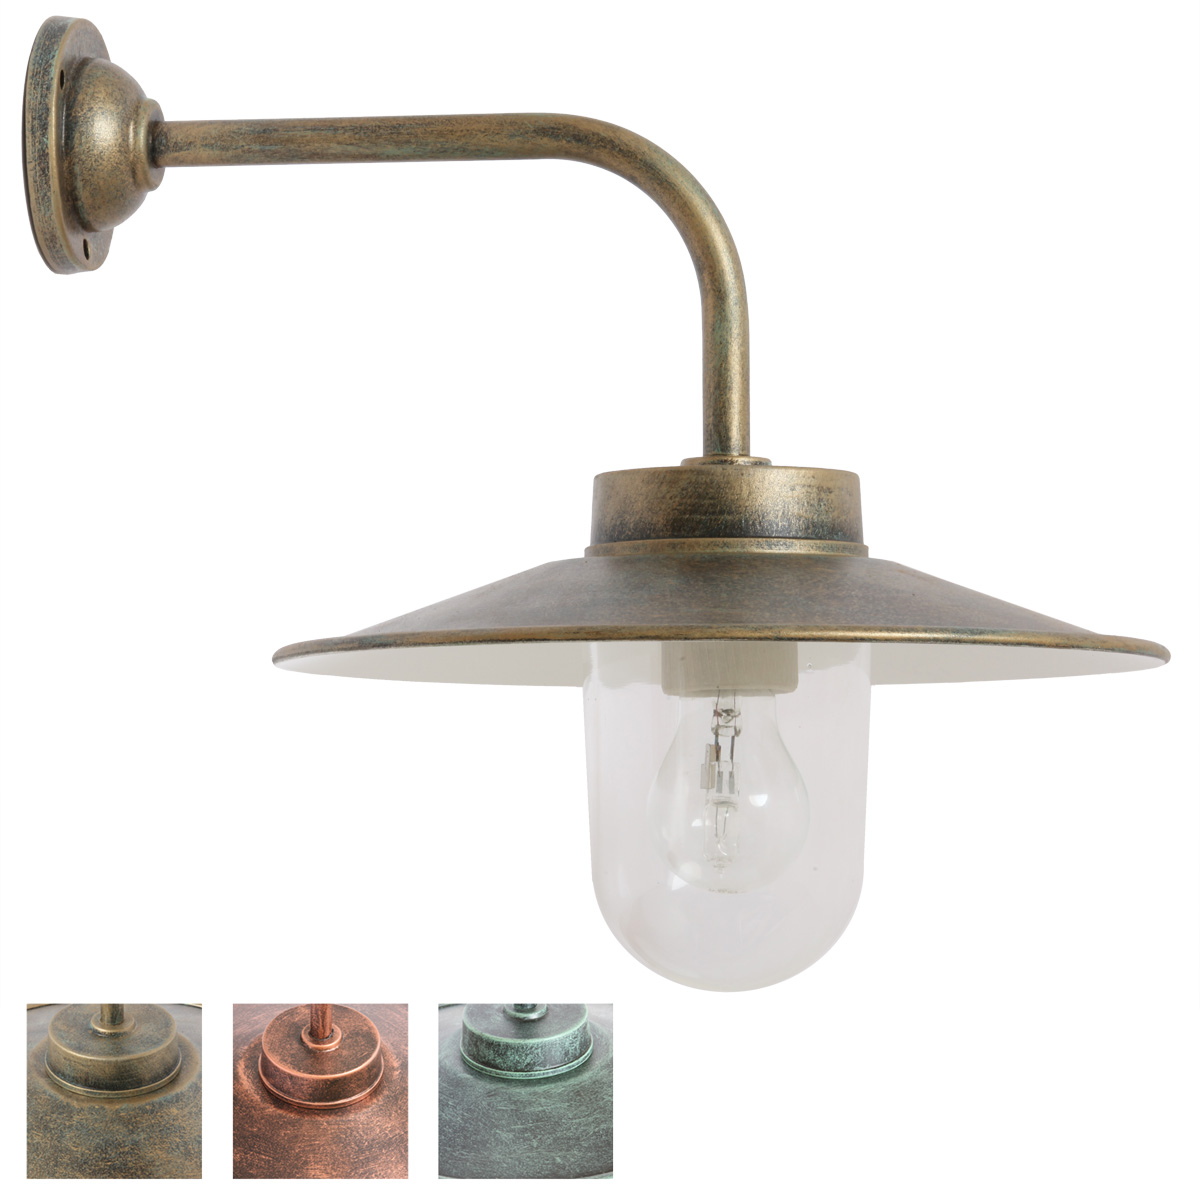 Classical Barn Lamp 38-90 in Antique Colors